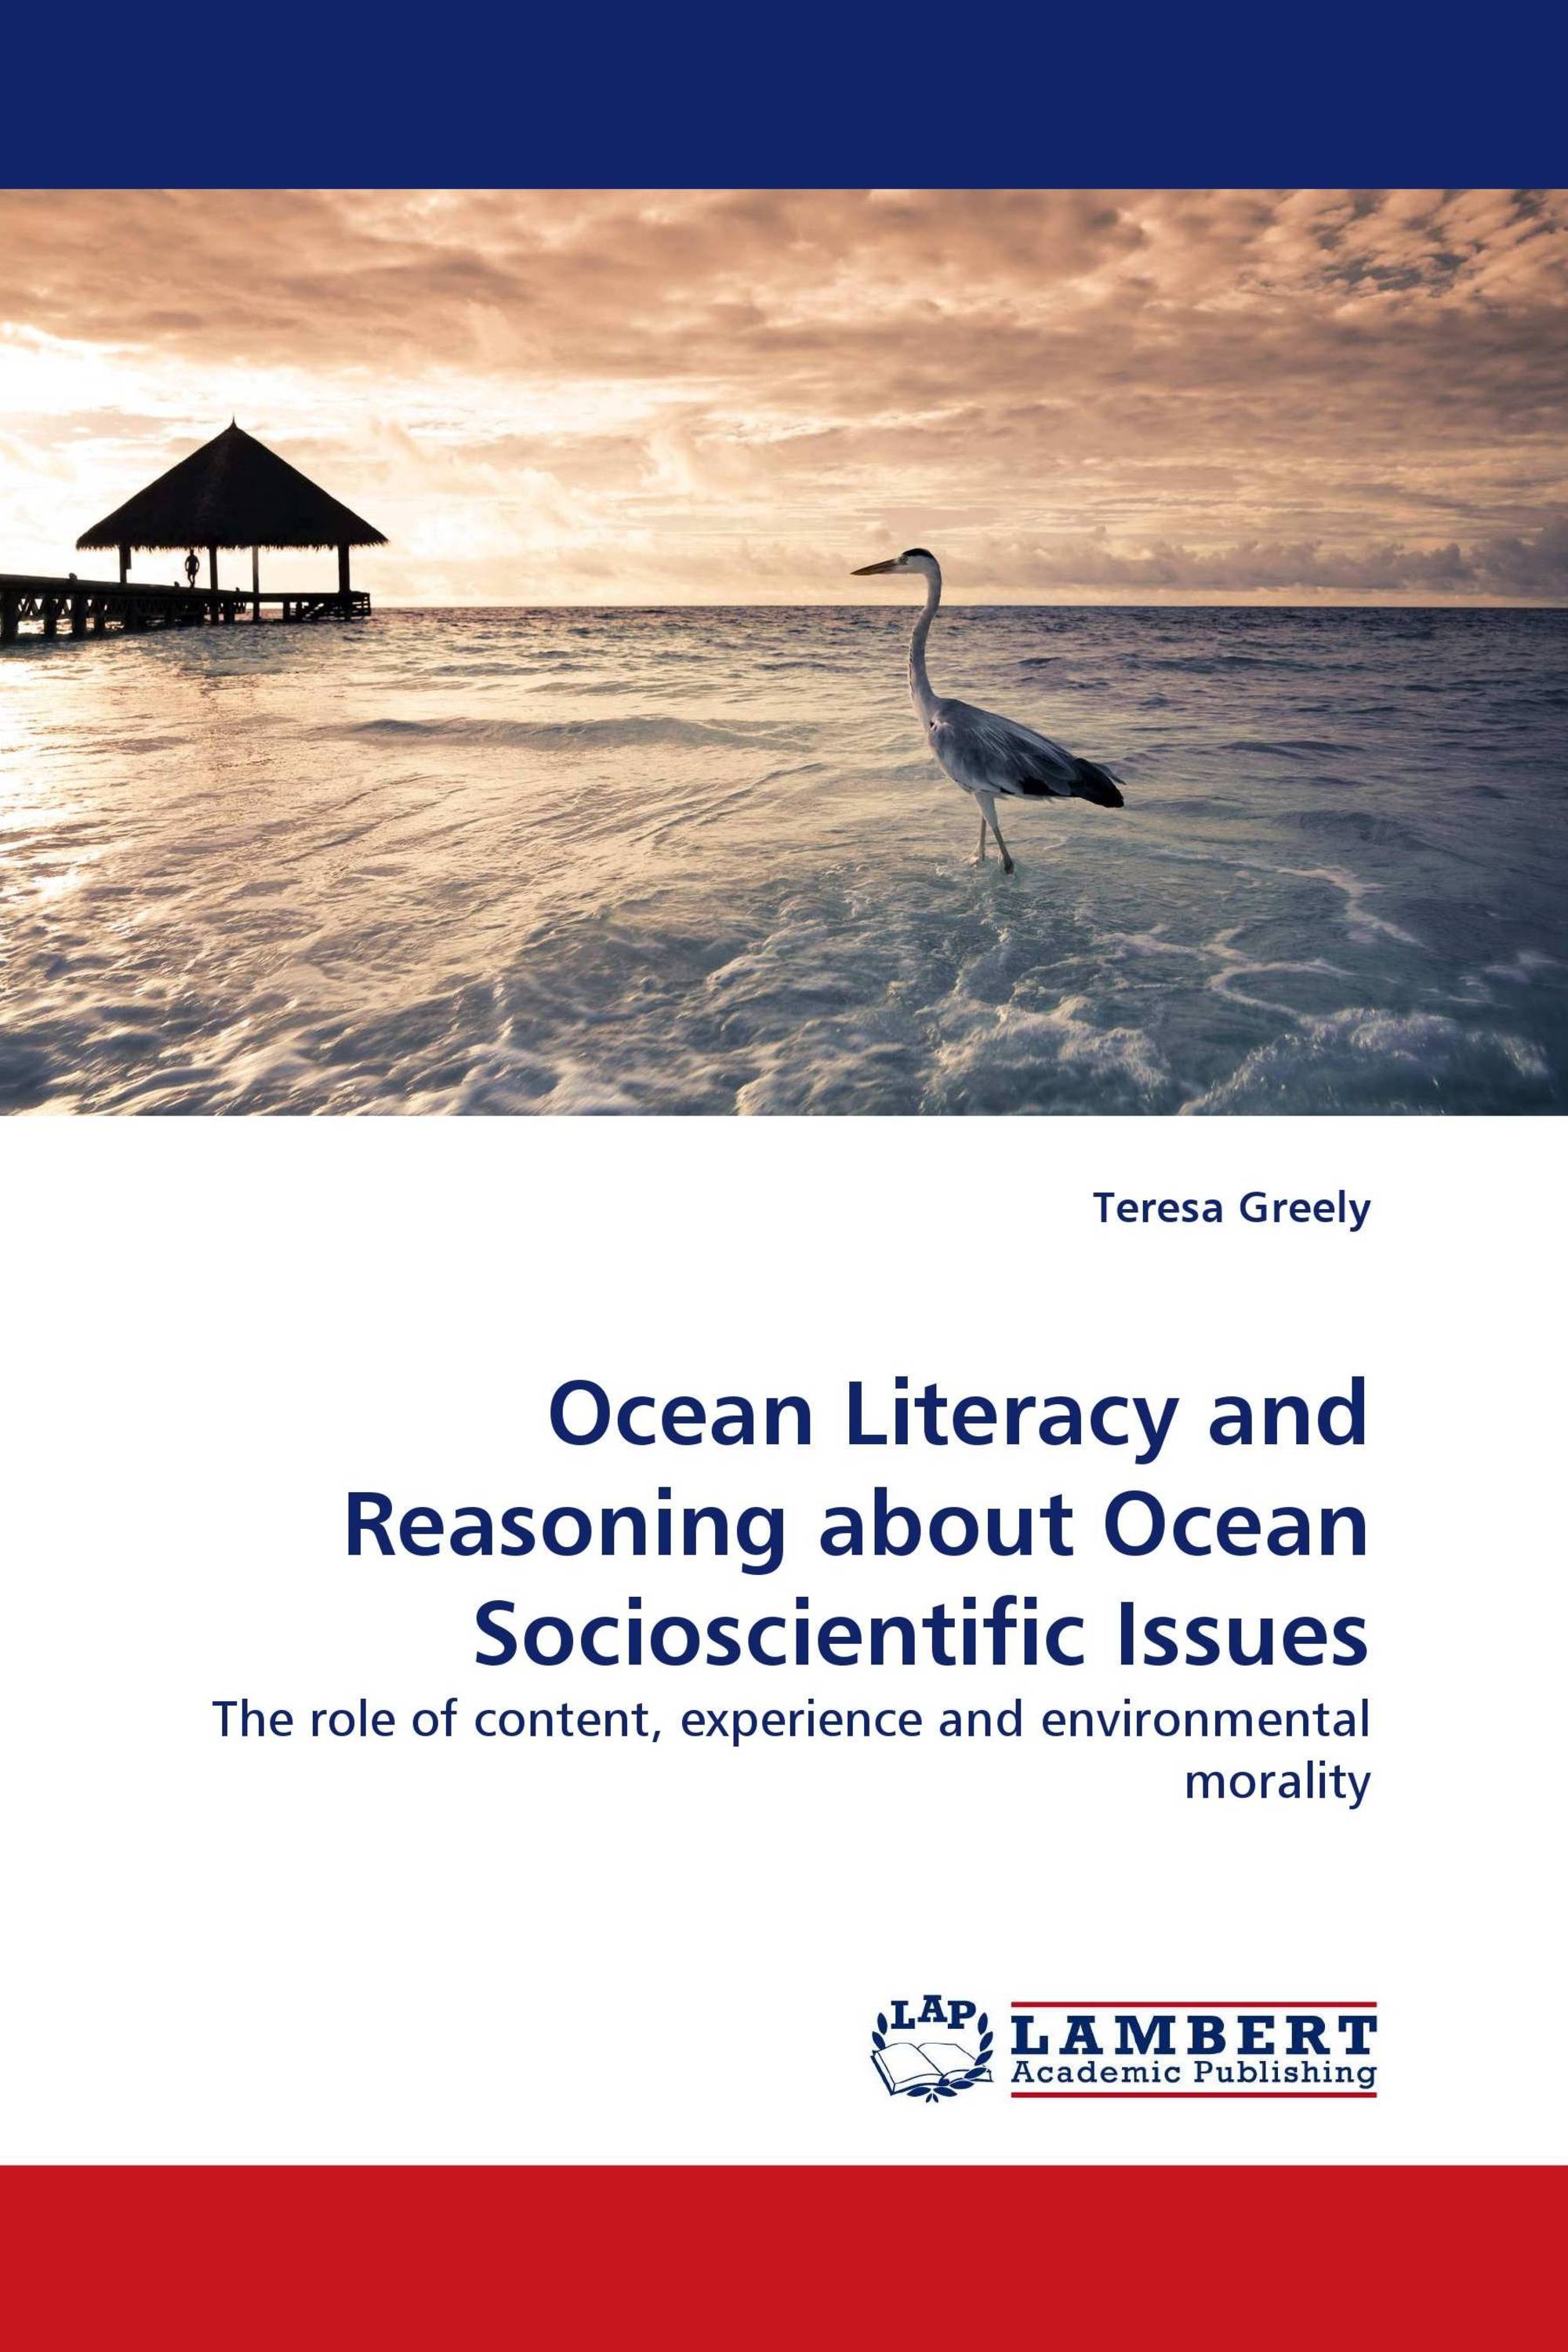 Ocean Literacy and Reasoning about Ocean Socioscientific Issues